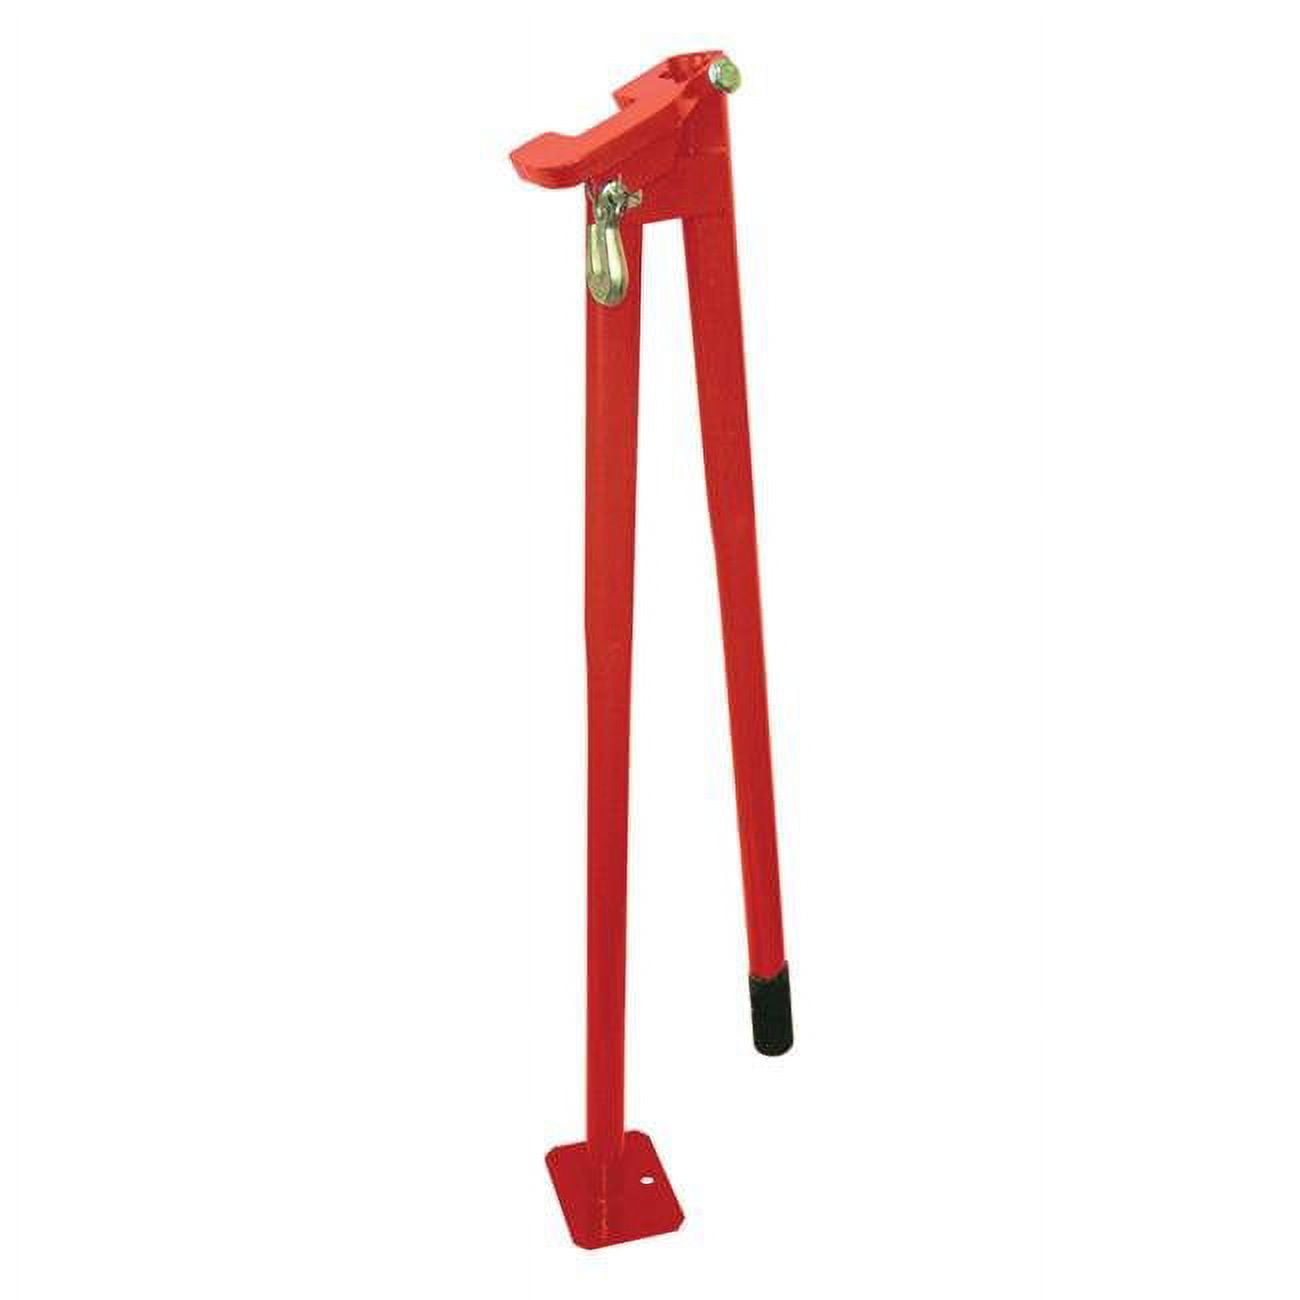 Picture of American Power Pull 5851852 5 x 36 in. Steel Post Puller